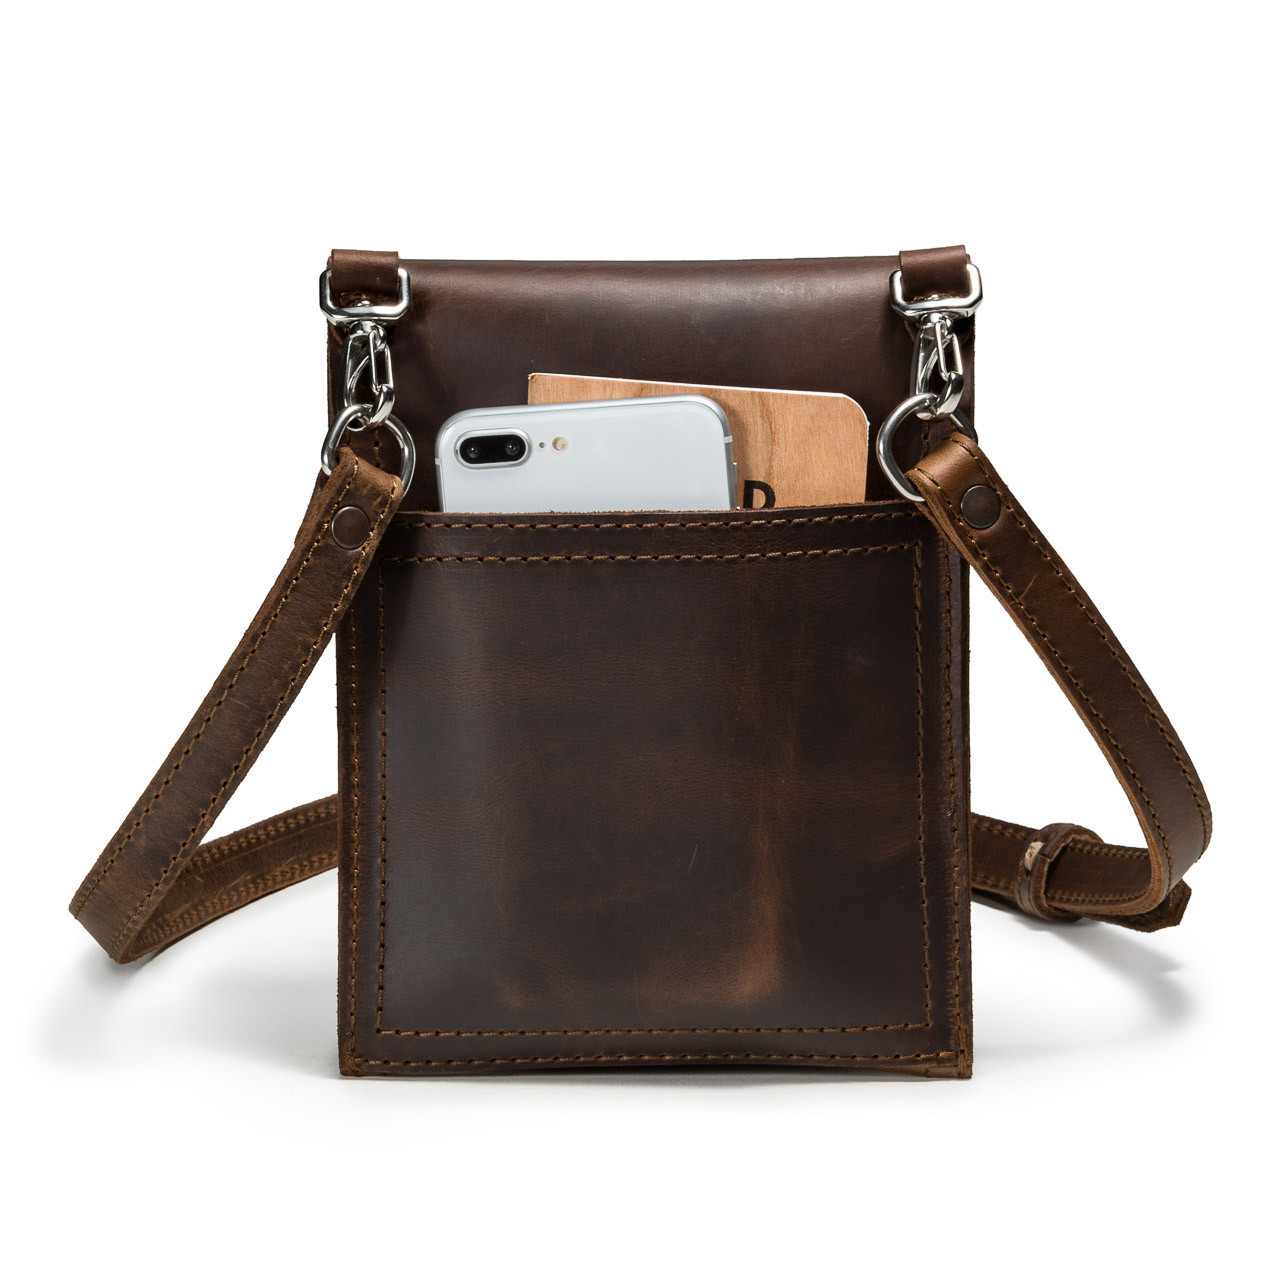 Men's Pouches - Small Leather Pouch Bags